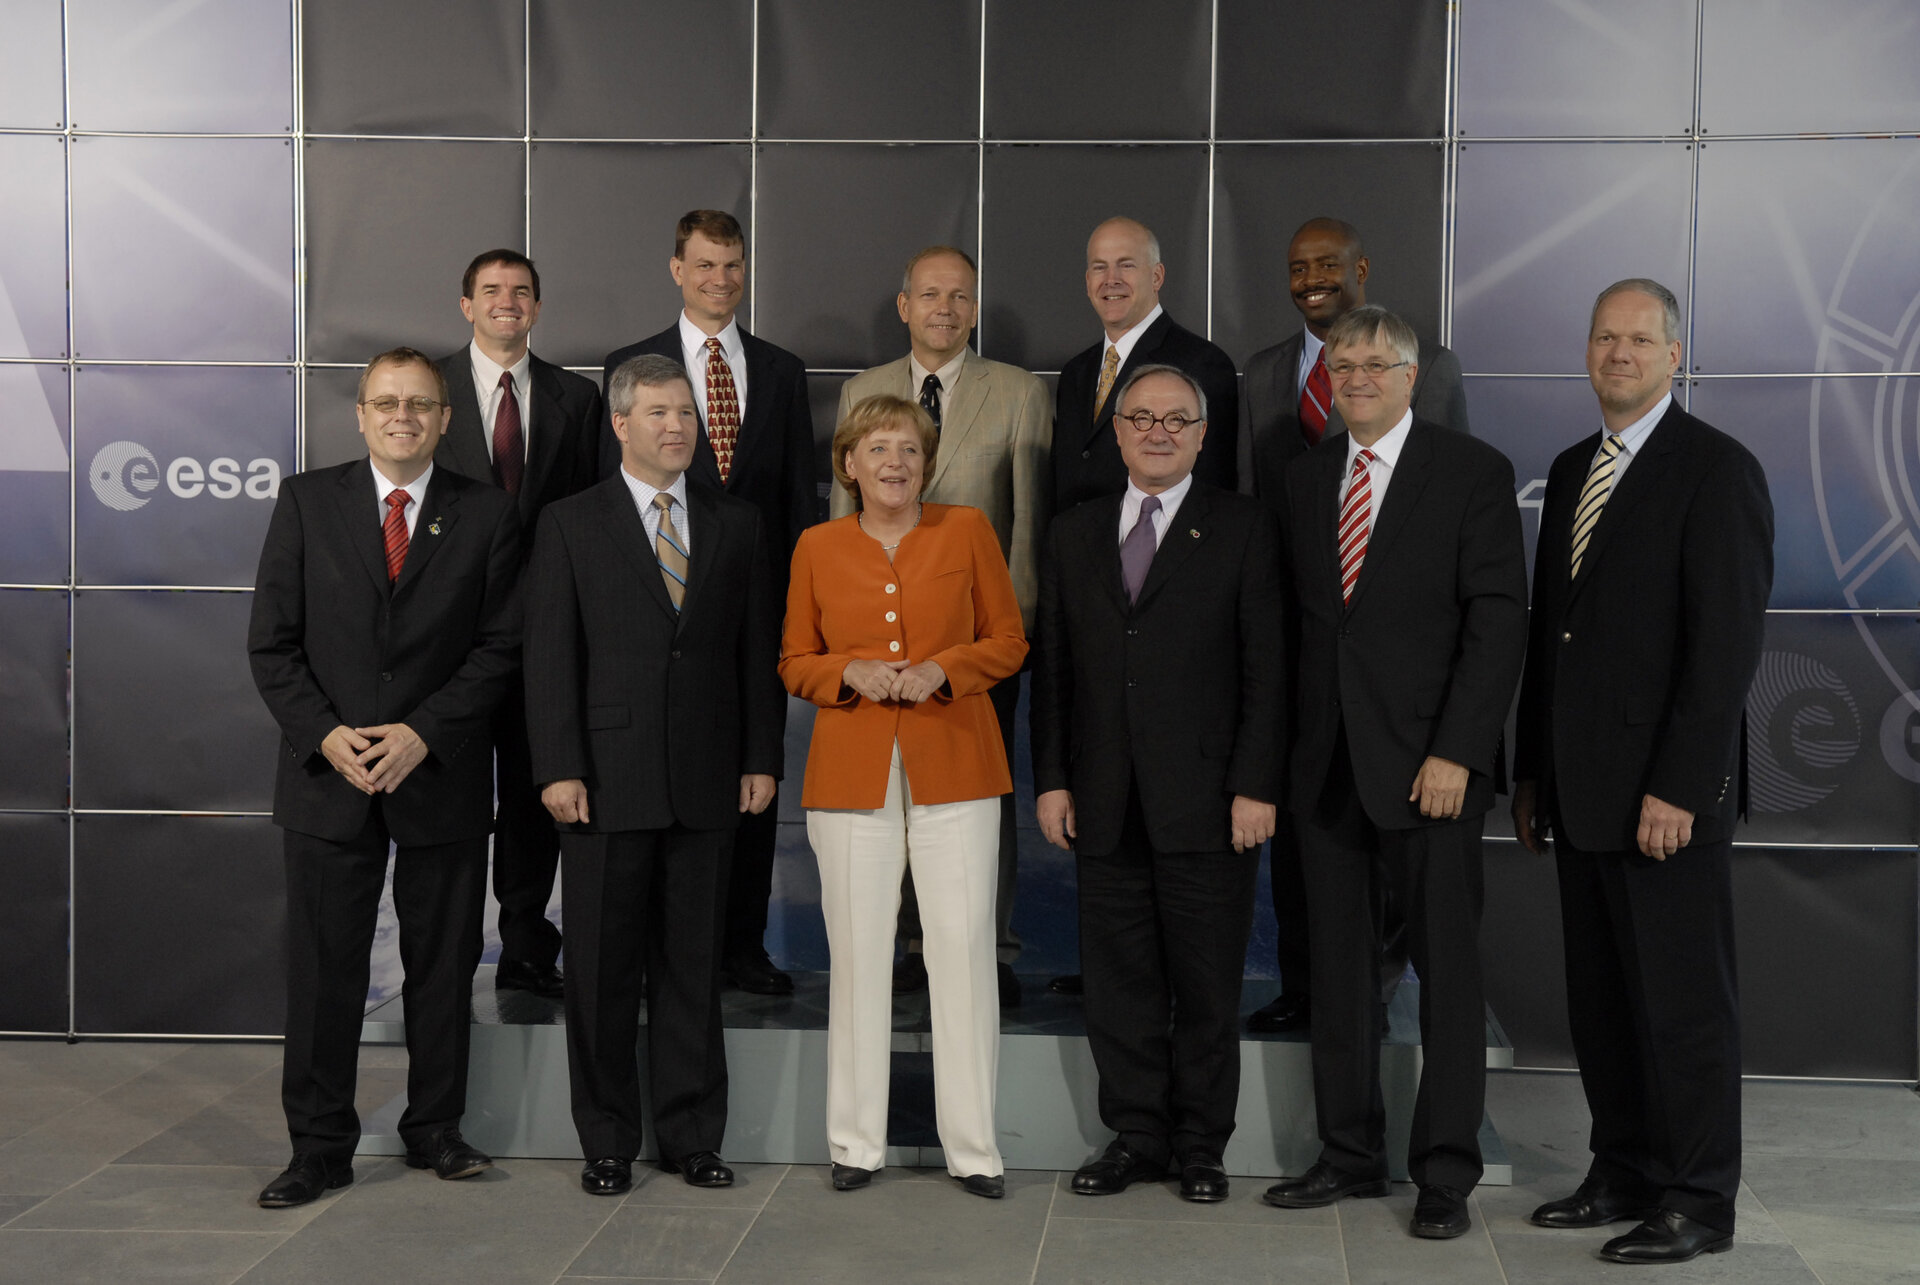 German Chancellor Angela Merkel welcomes the STS-122 Shuttle crew at the Federal Chancellery in Berlin